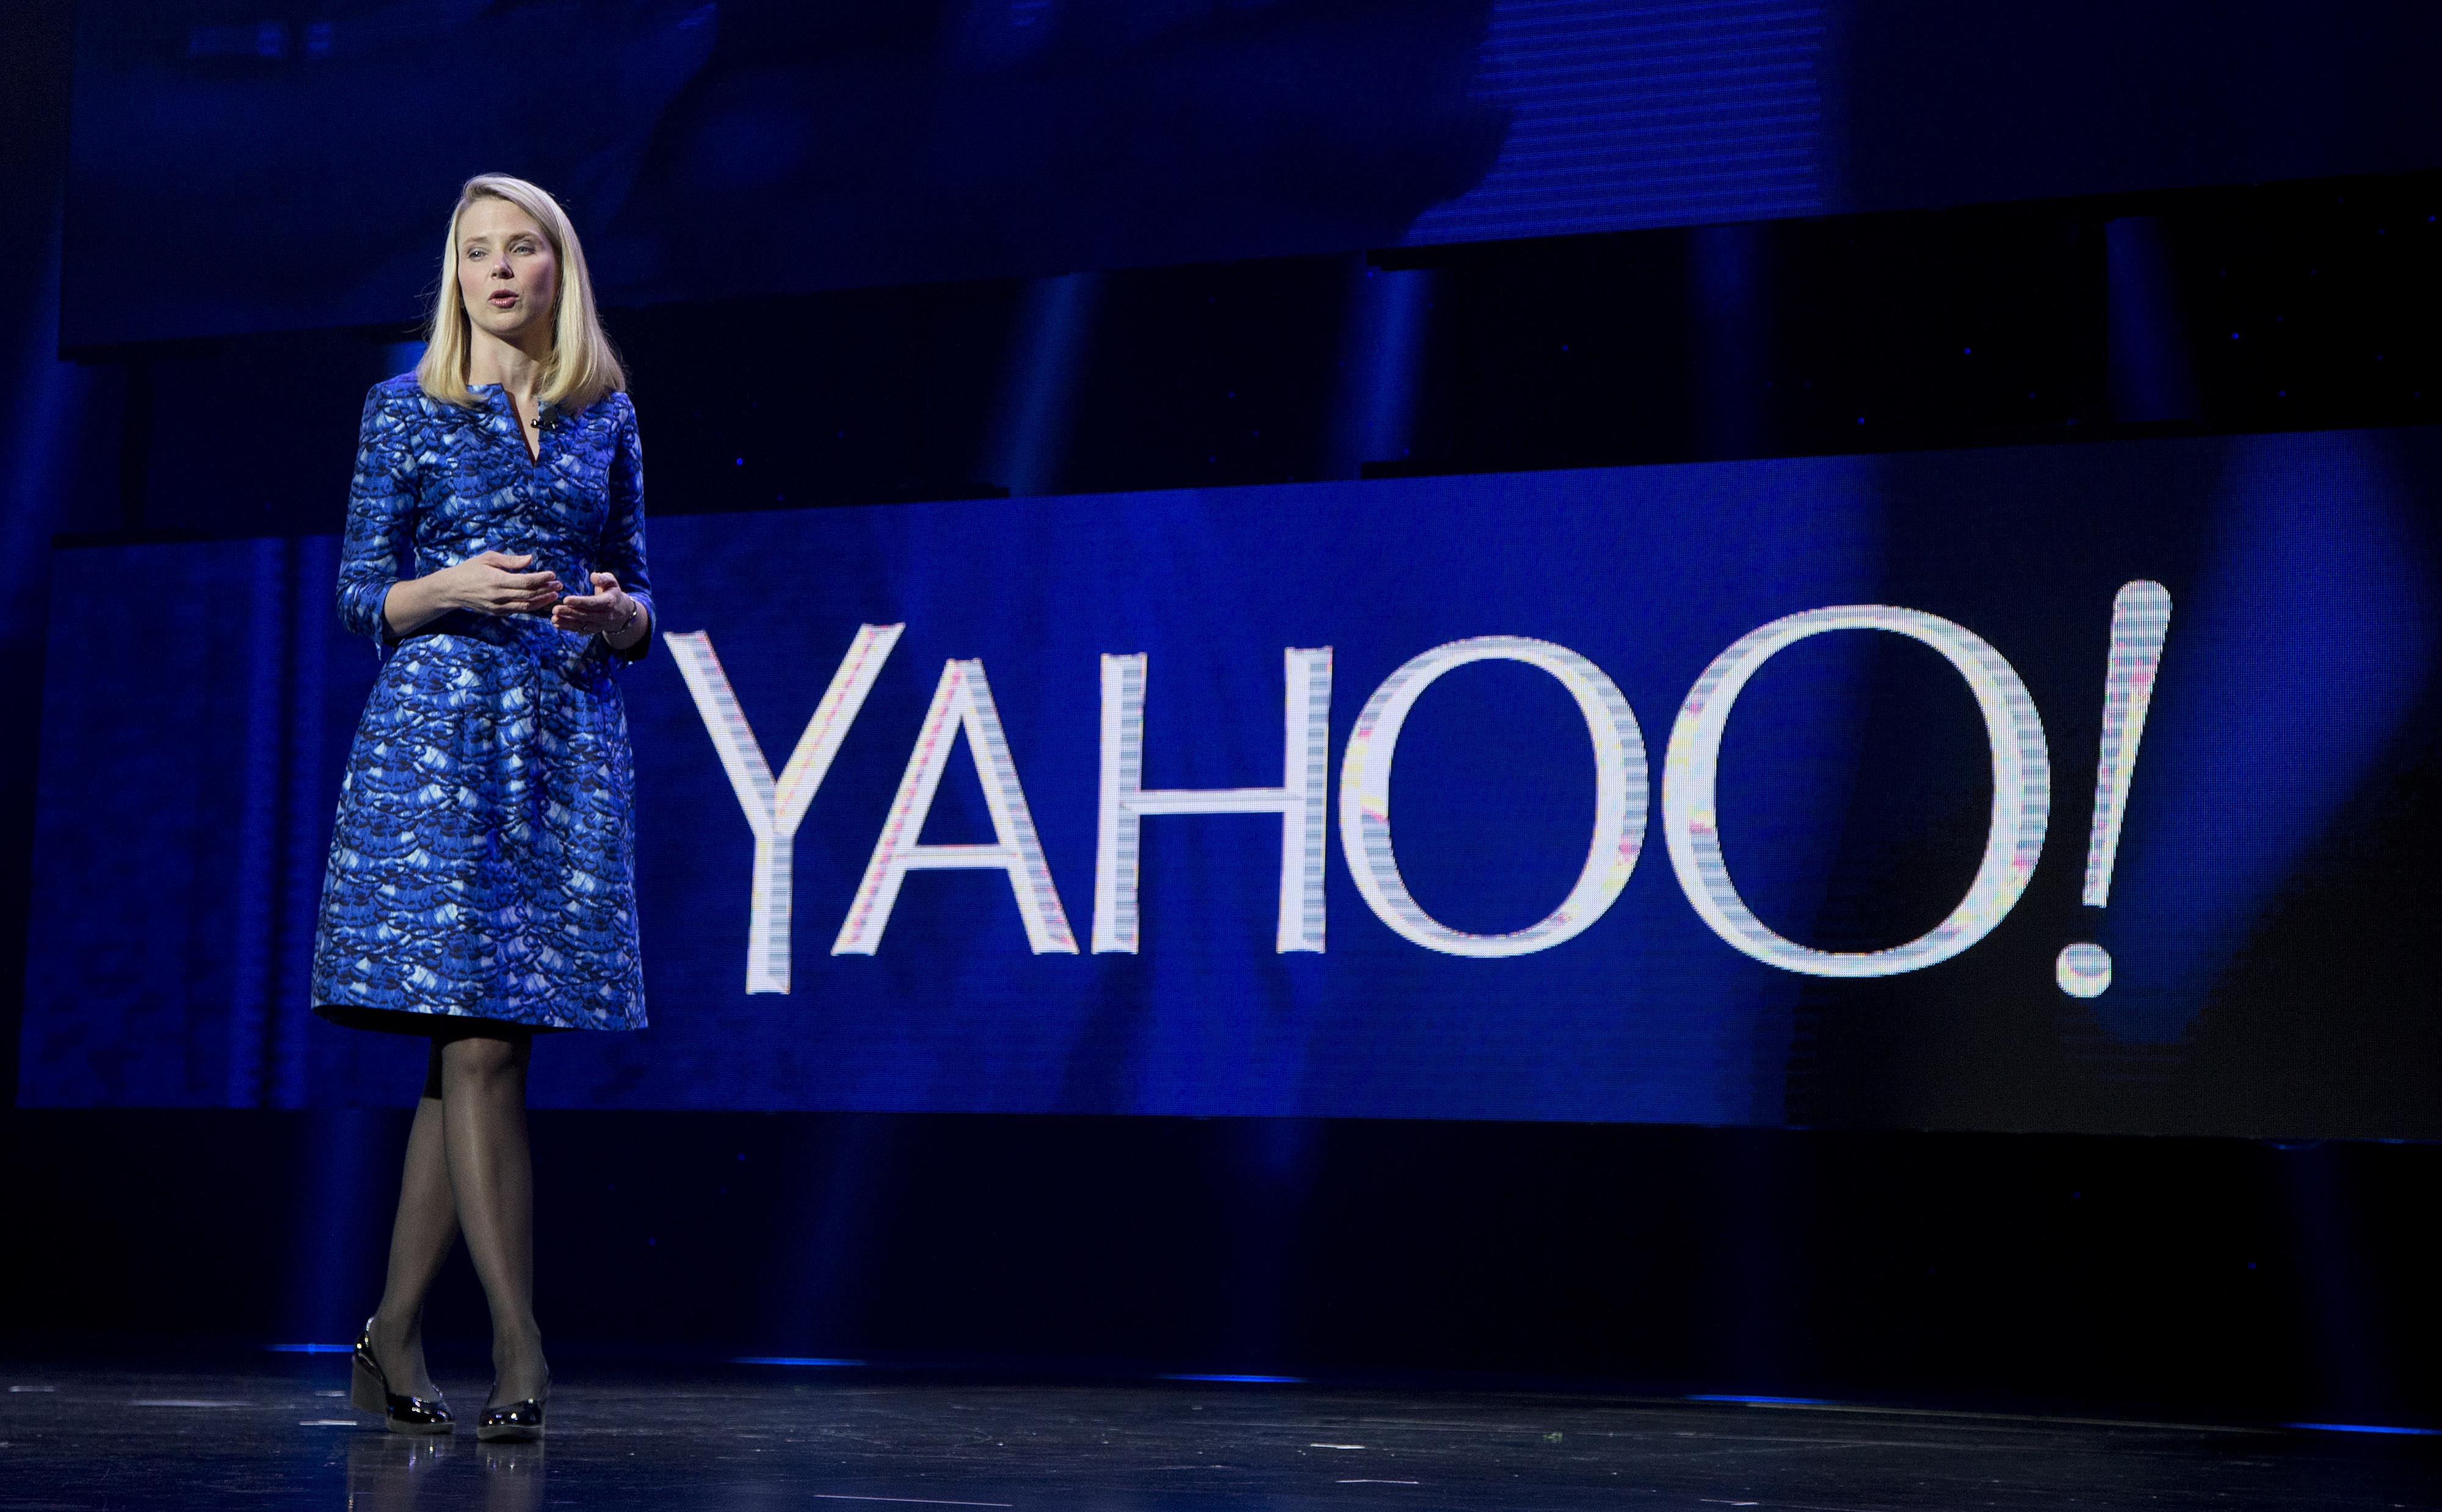 Marissa Meyer has defended the performance of Yahoo's emerging businesses like Tumblr. Photo: AP